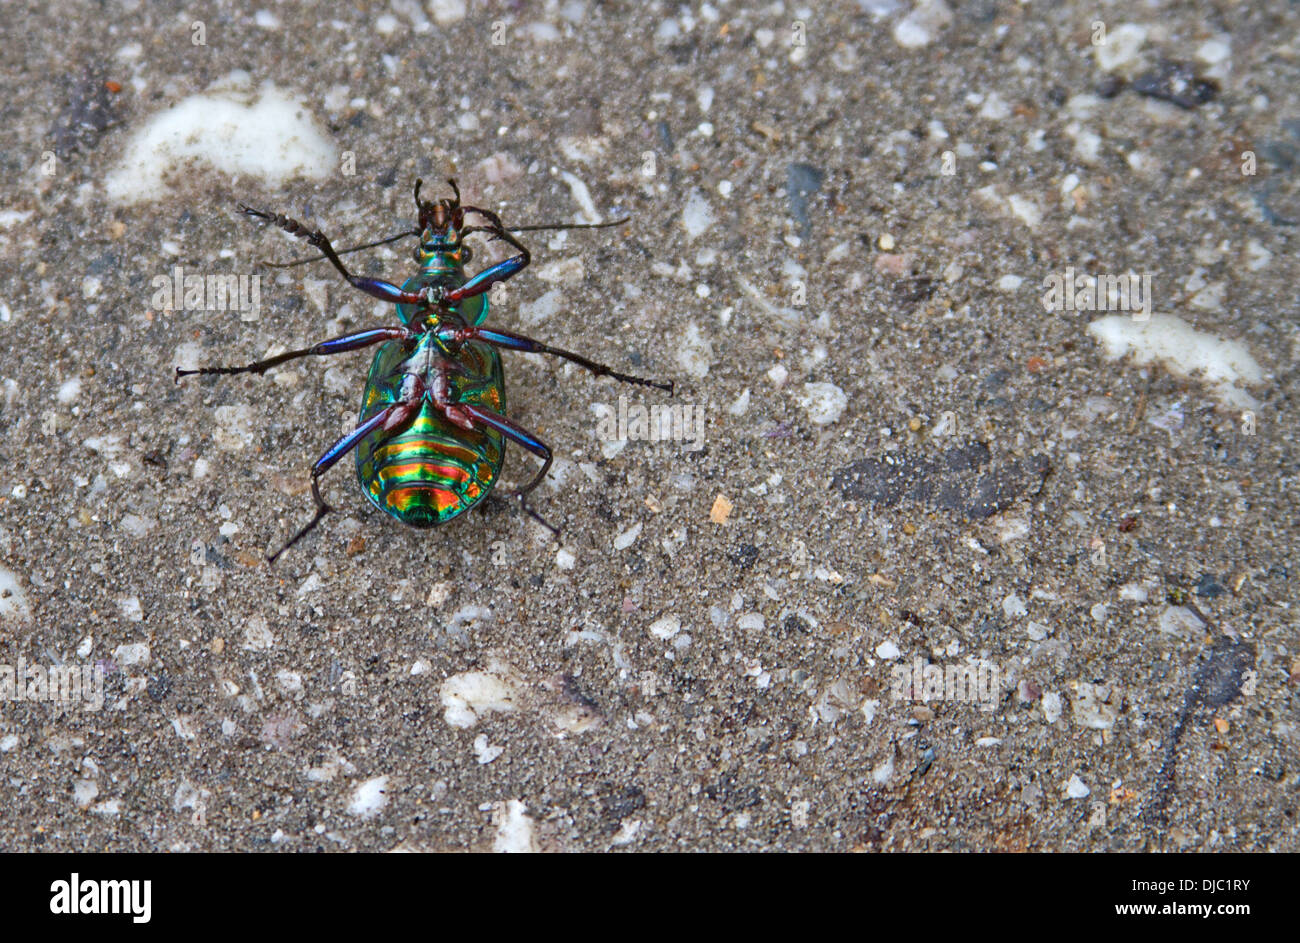 An upside down Fiery Searcher Beetle showing its colorful underbelly markings Stock Photo